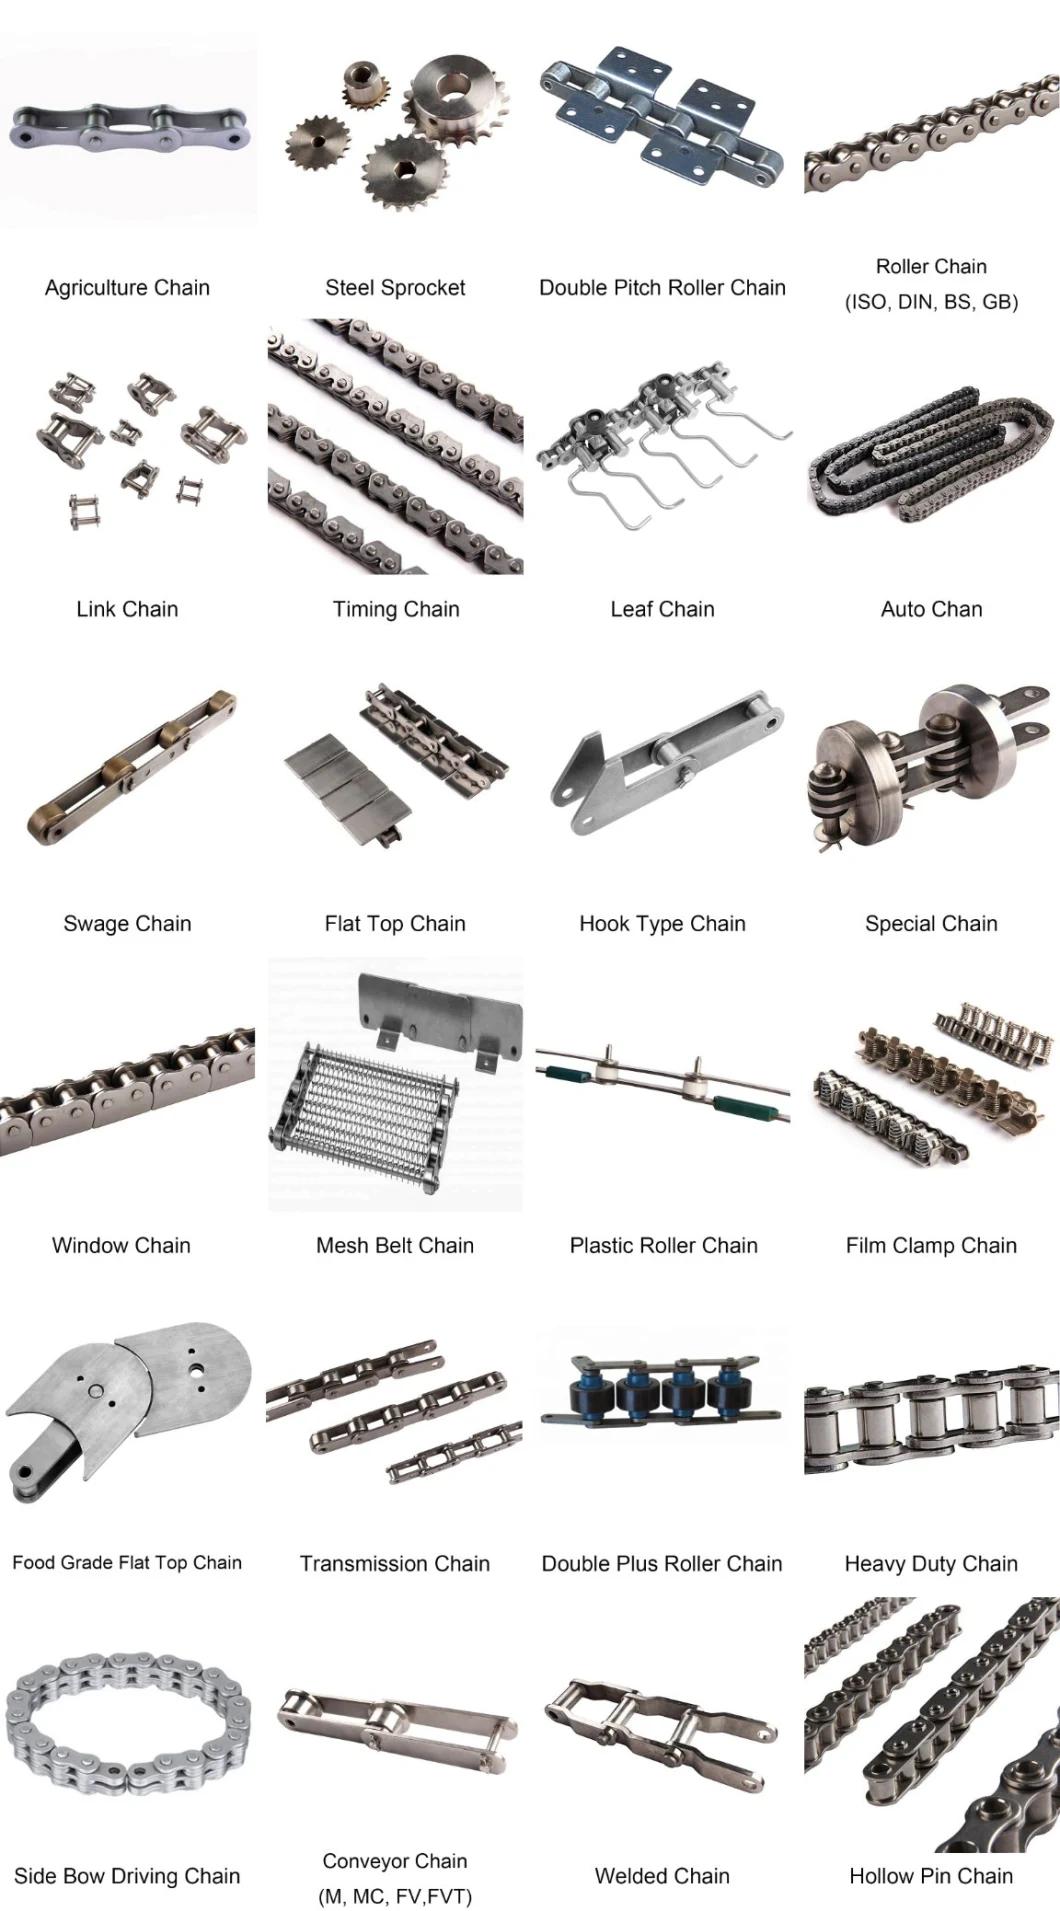 Factory Chain Manufacturer Various Industrial Flat Top Conveyor Chains